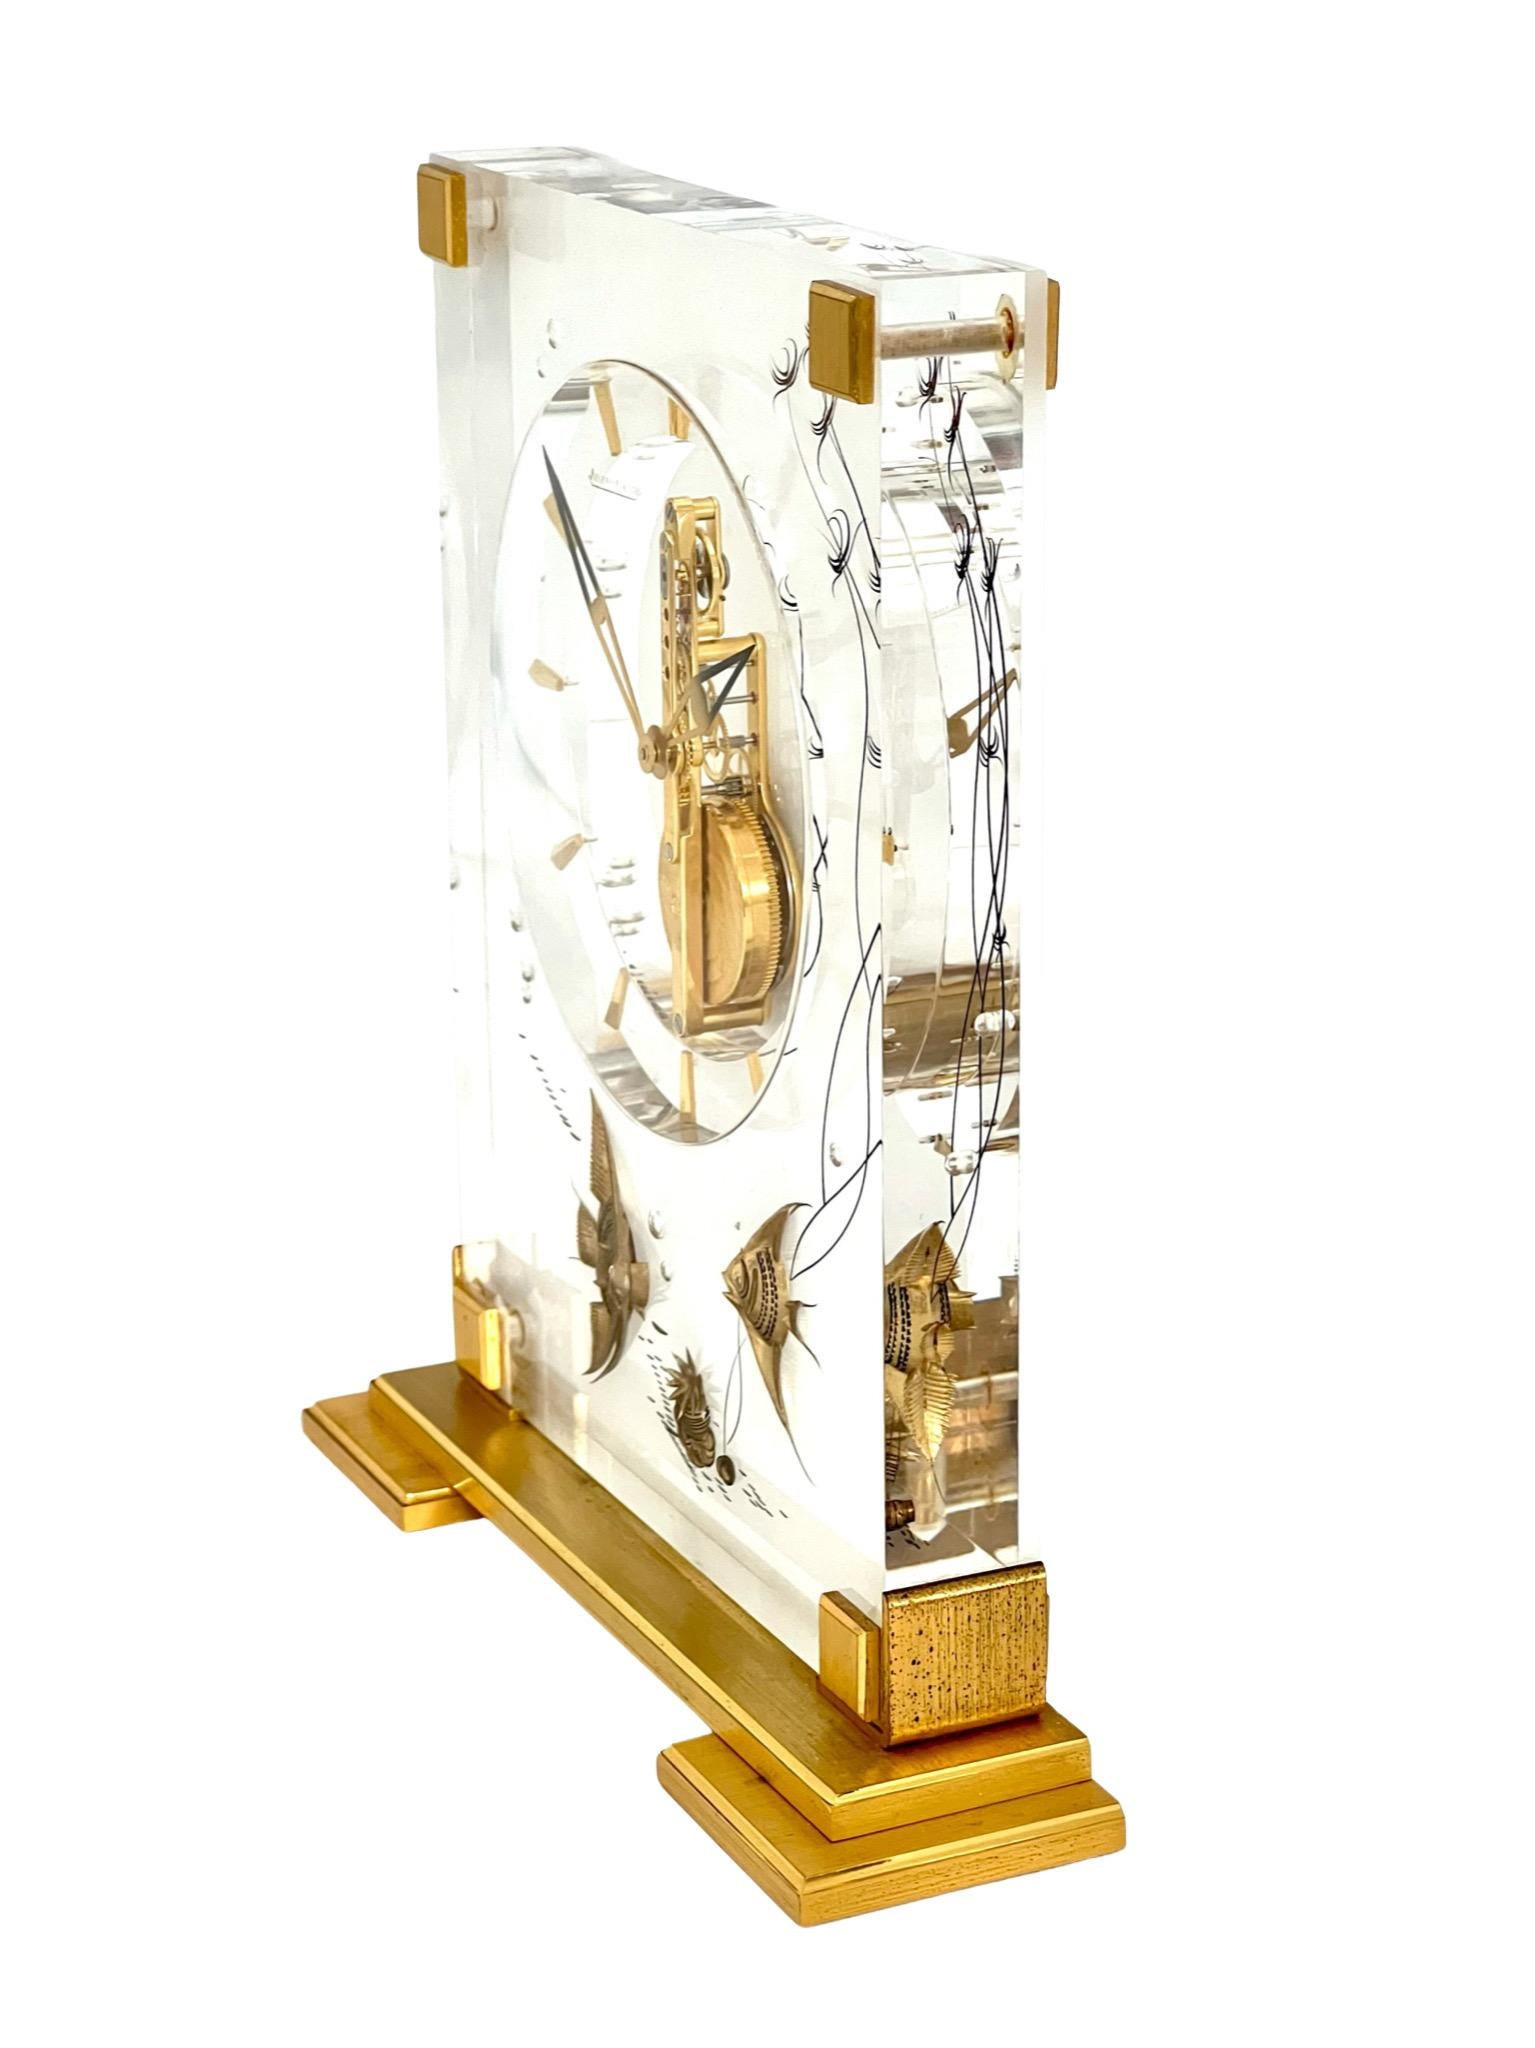 Jaeger LeCoultre Mid-Century Brass and Glass Maritime Marina Clock No. 352 7